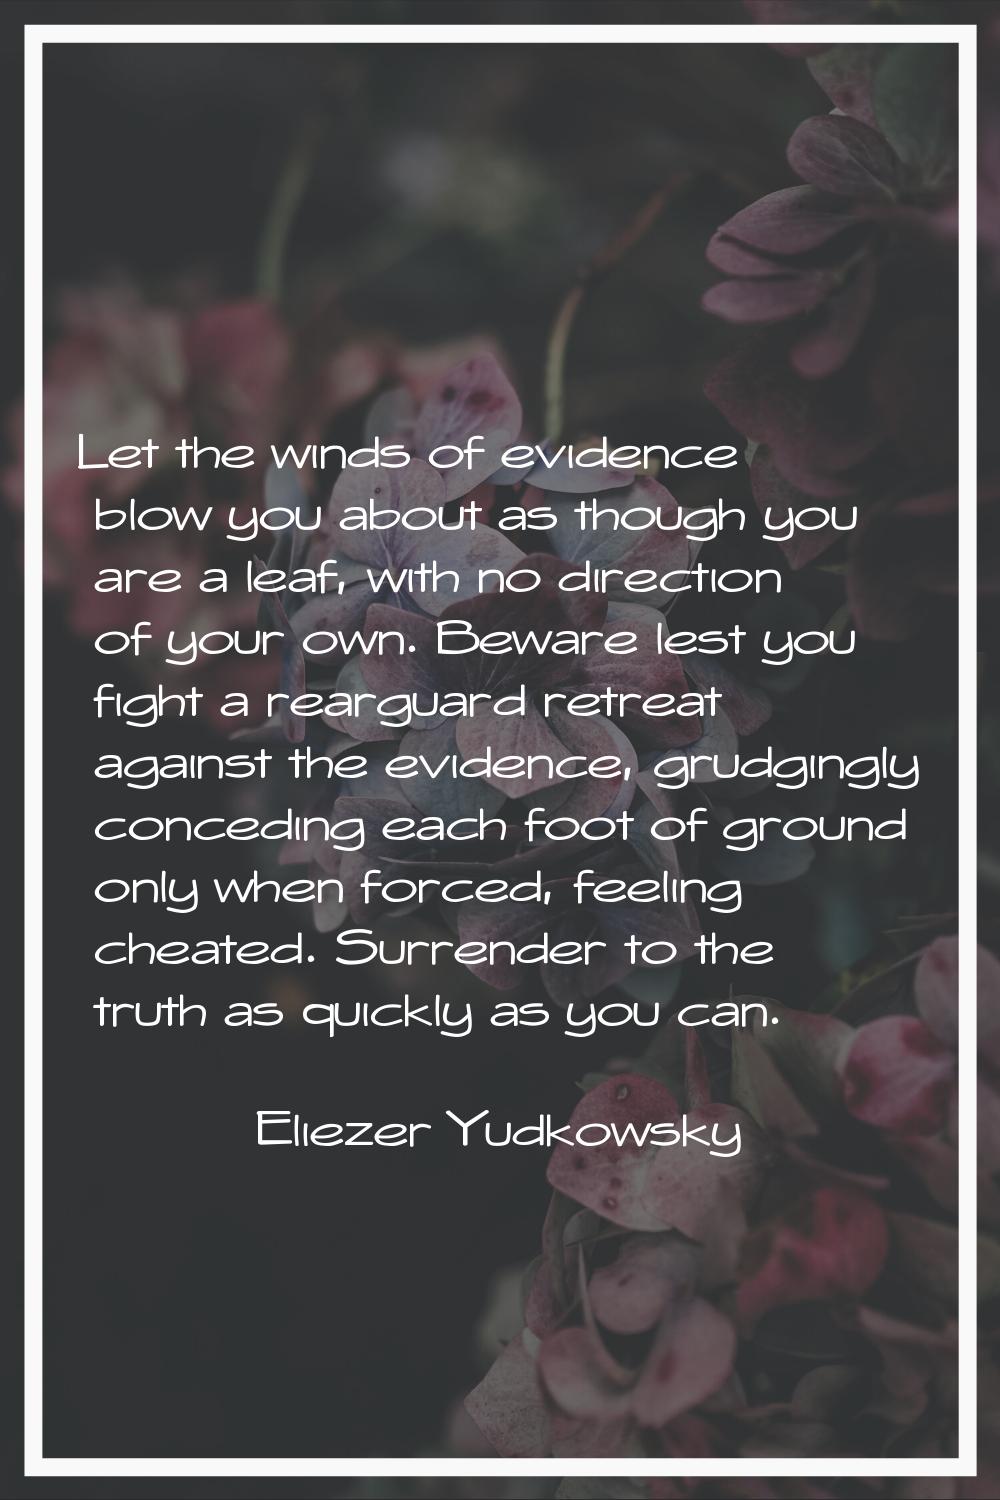 Let the winds of evidence blow you about as though you are a leaf, with no direction of your own. B